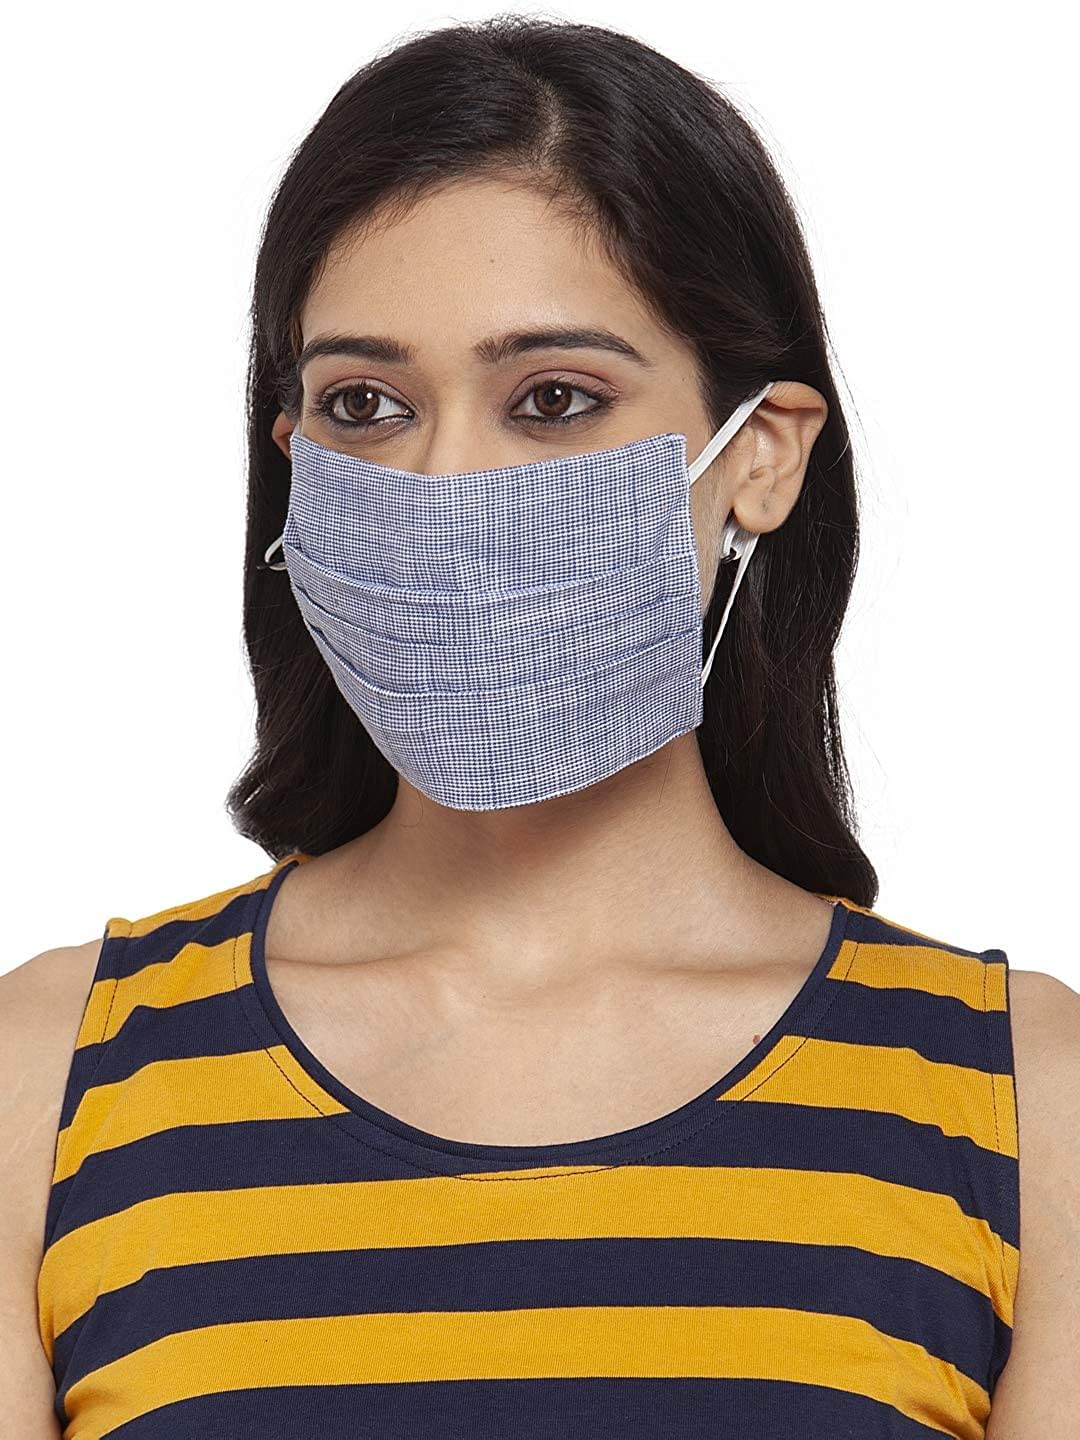 Unisex 3-Layer Adjustable & Stretchable Protective Mask with Ear Loops - Size L - Set of 4